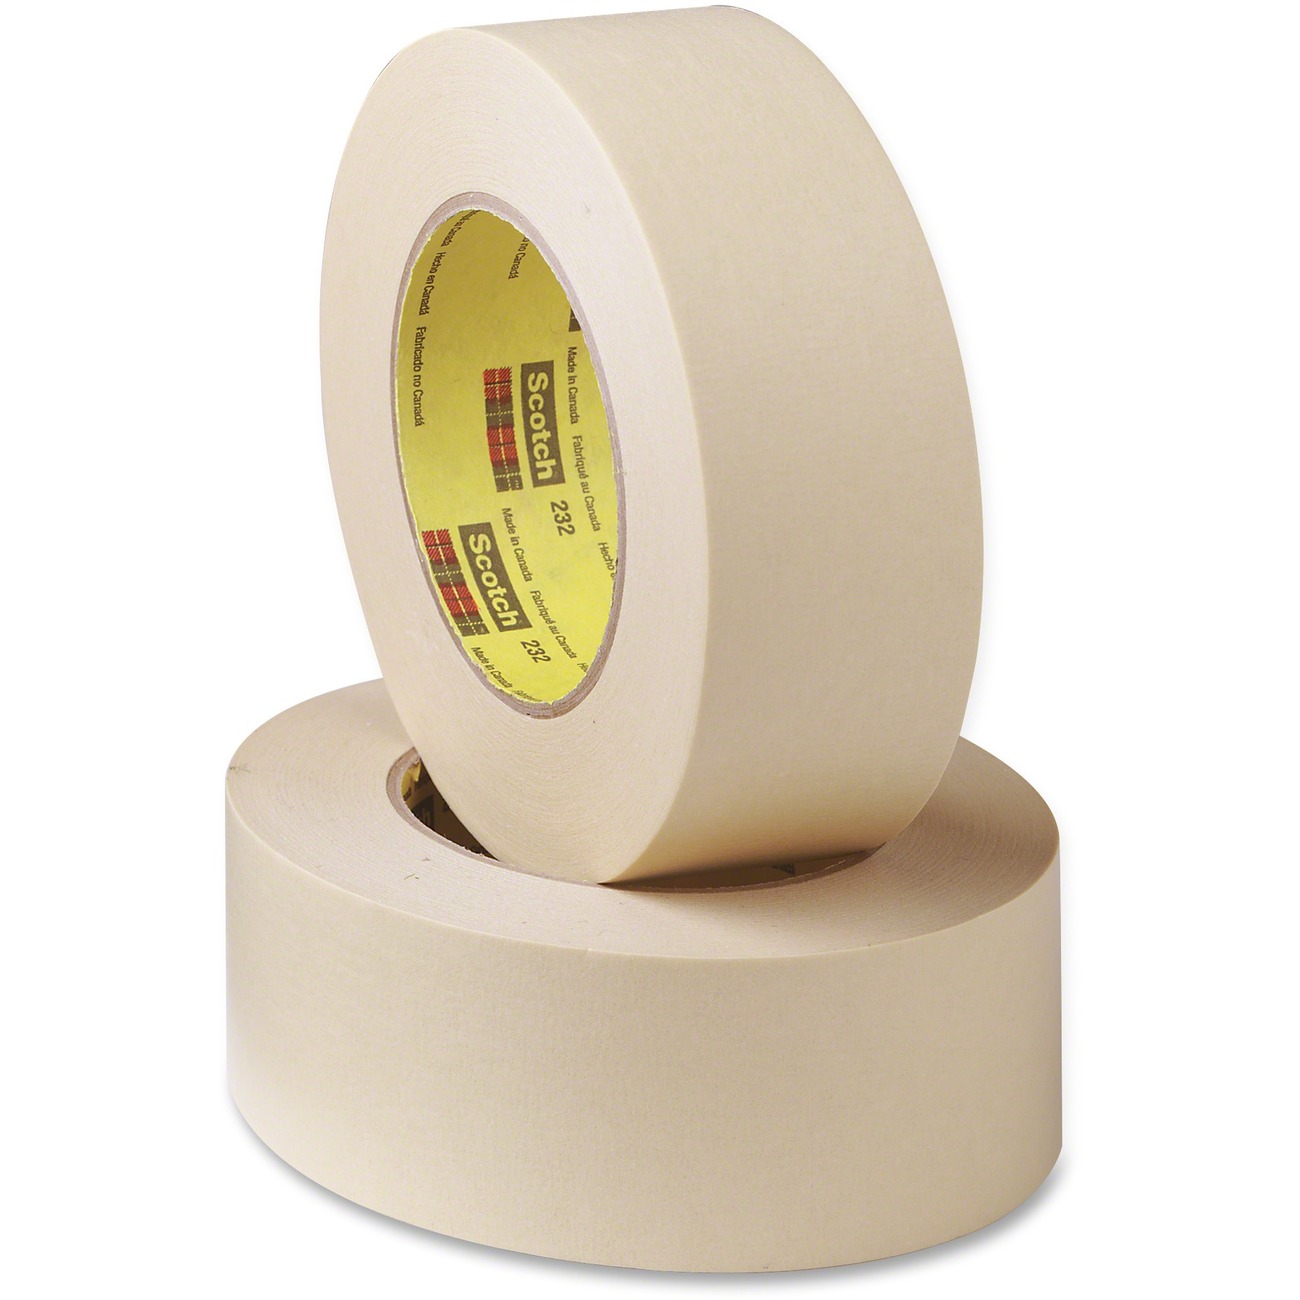 3M Scotch Masking Tape for Hard-to-Stick Surfaces 24/case:Facility Safety